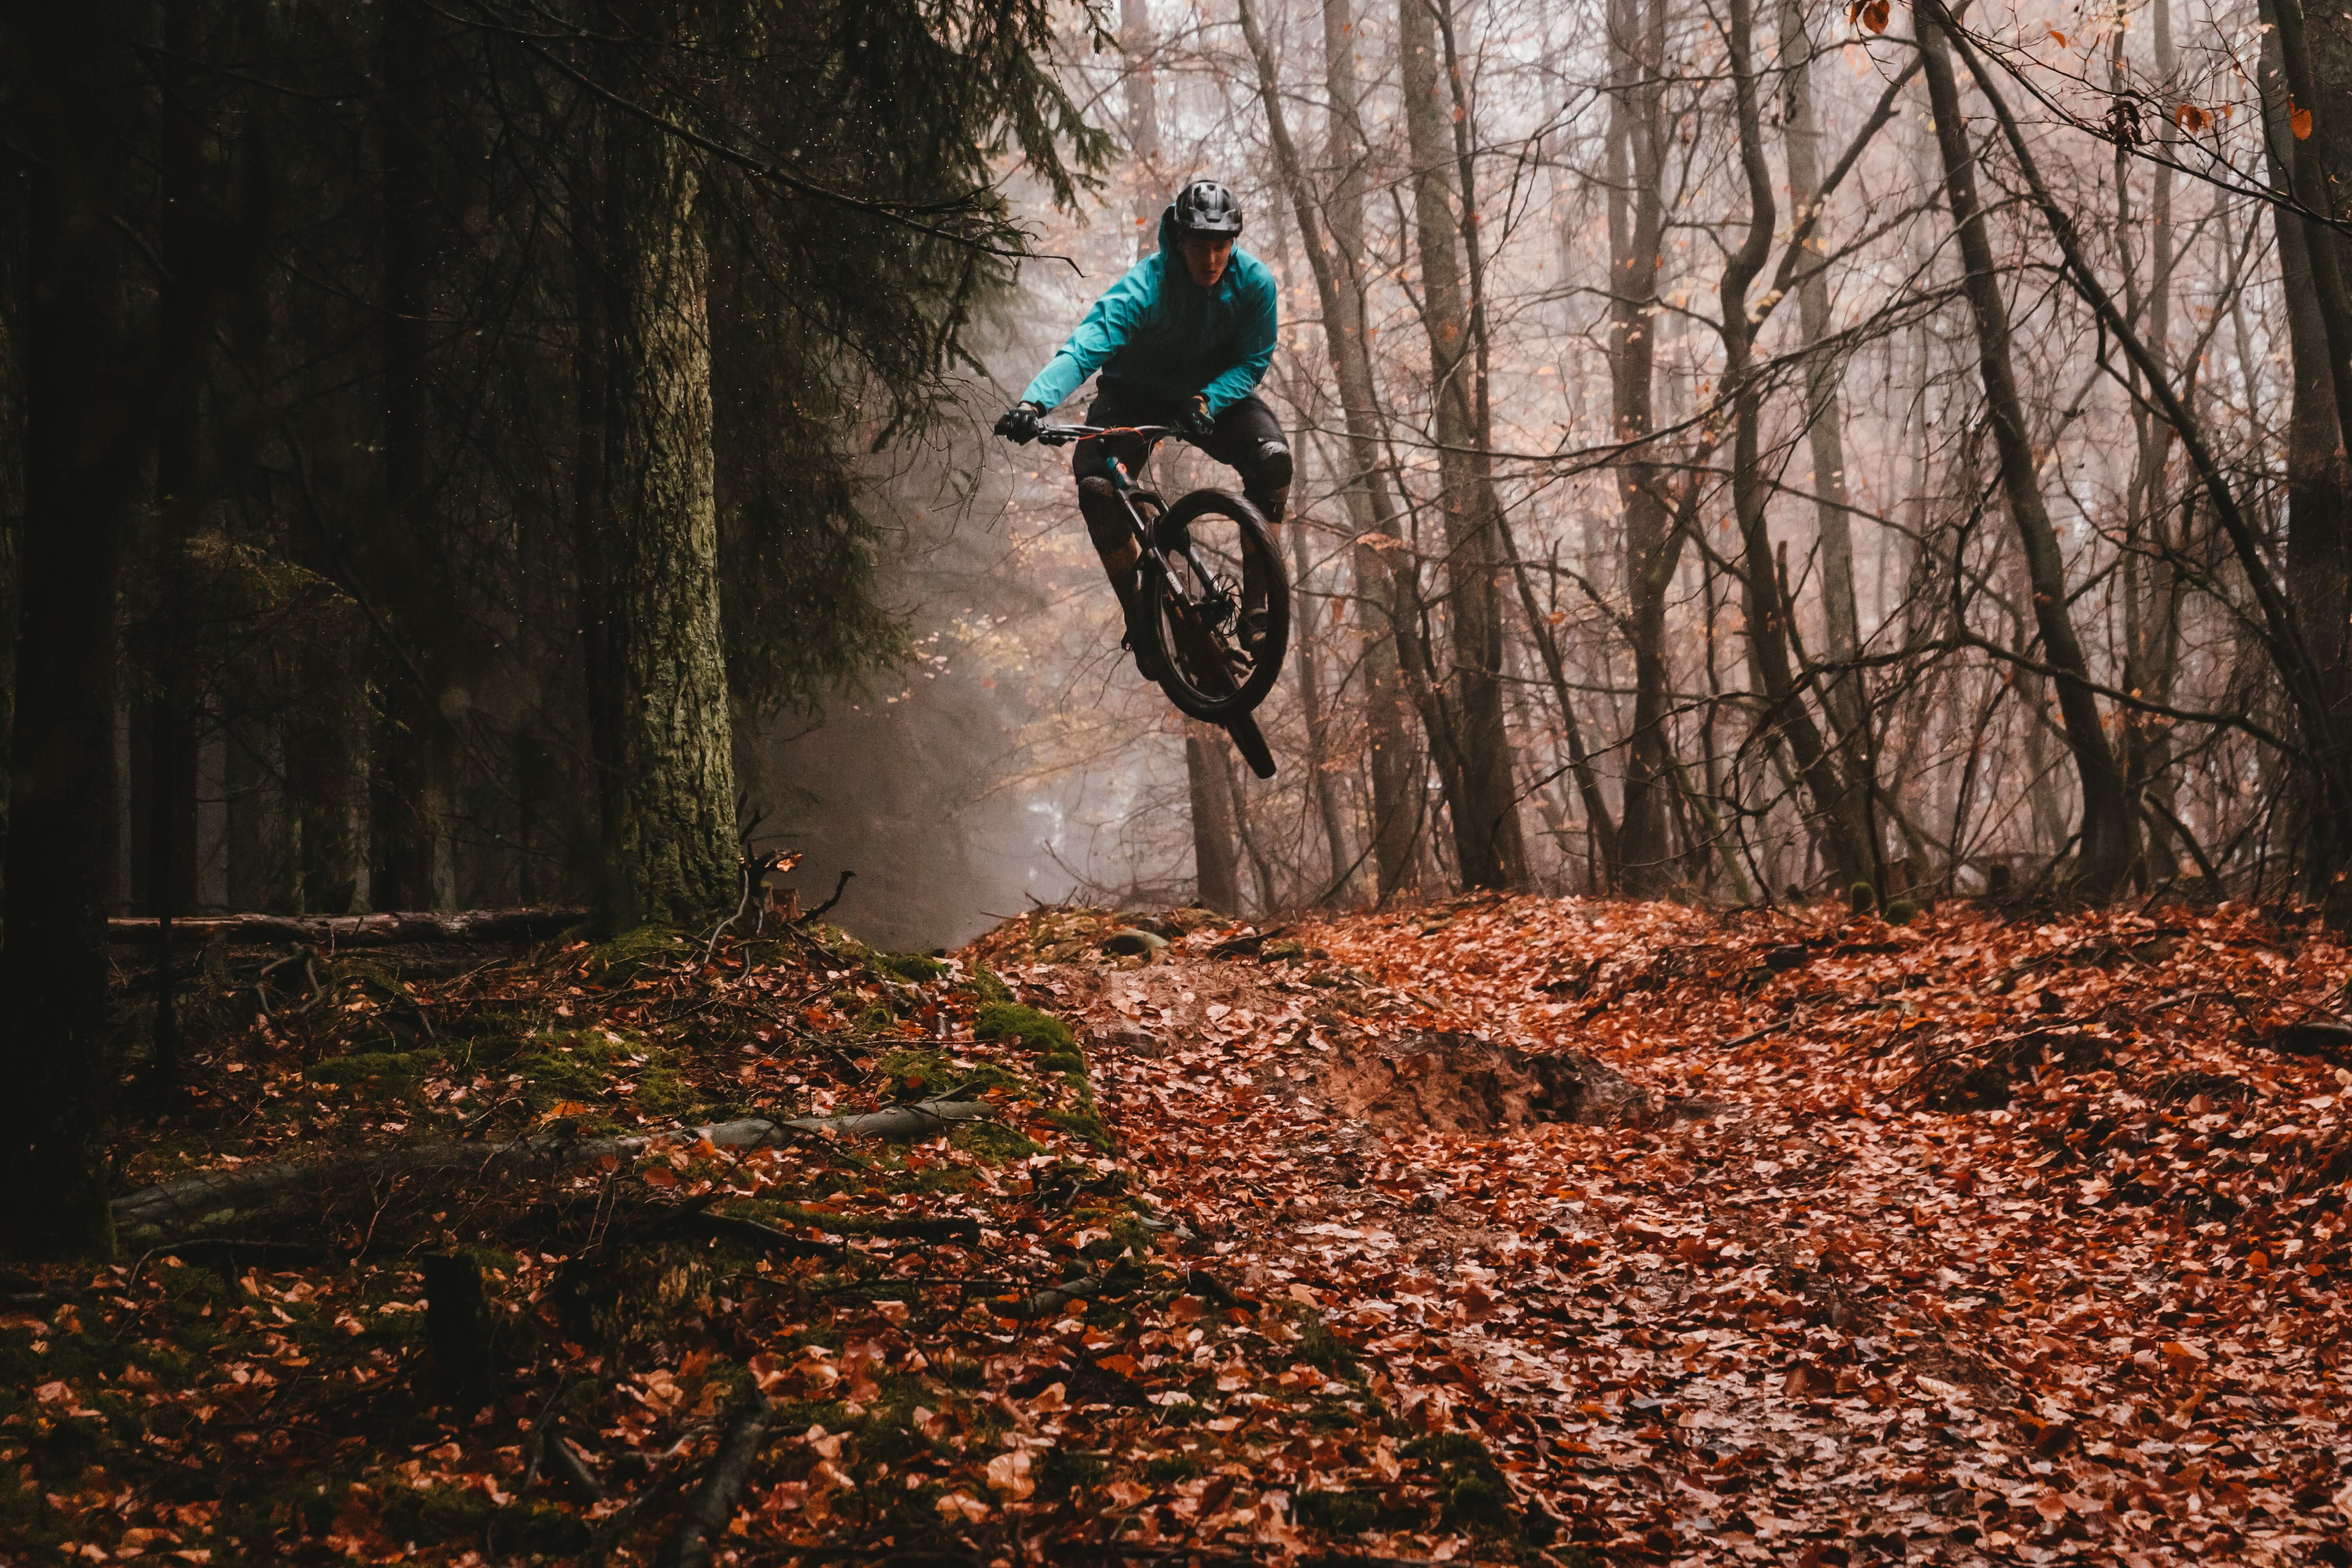 In a misty forest, a man on a mountain bike in turquoise clothing and a bicycle helmet jumps over a hill covered with autumn leaves.